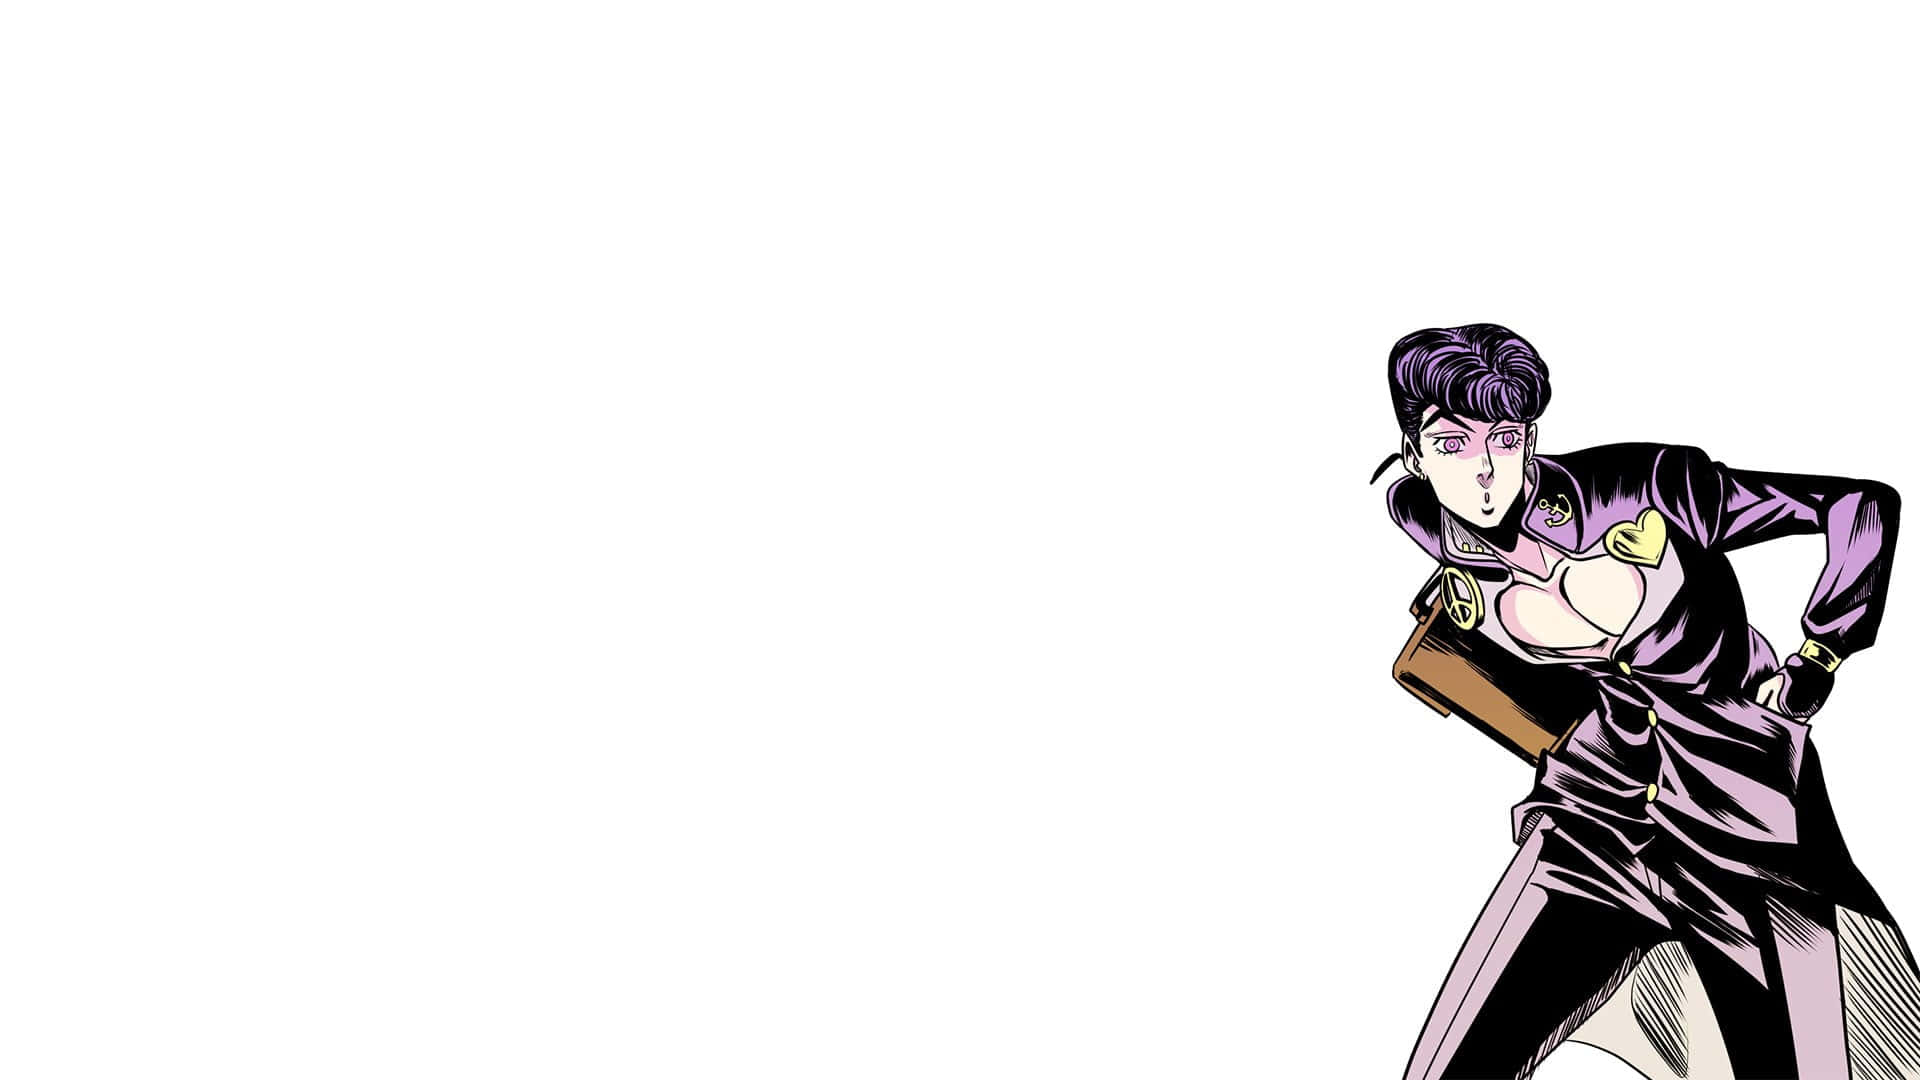 The stylish and powerful Josuke Higashikata poses confidently in this high-quality wallpaper. Wallpaper